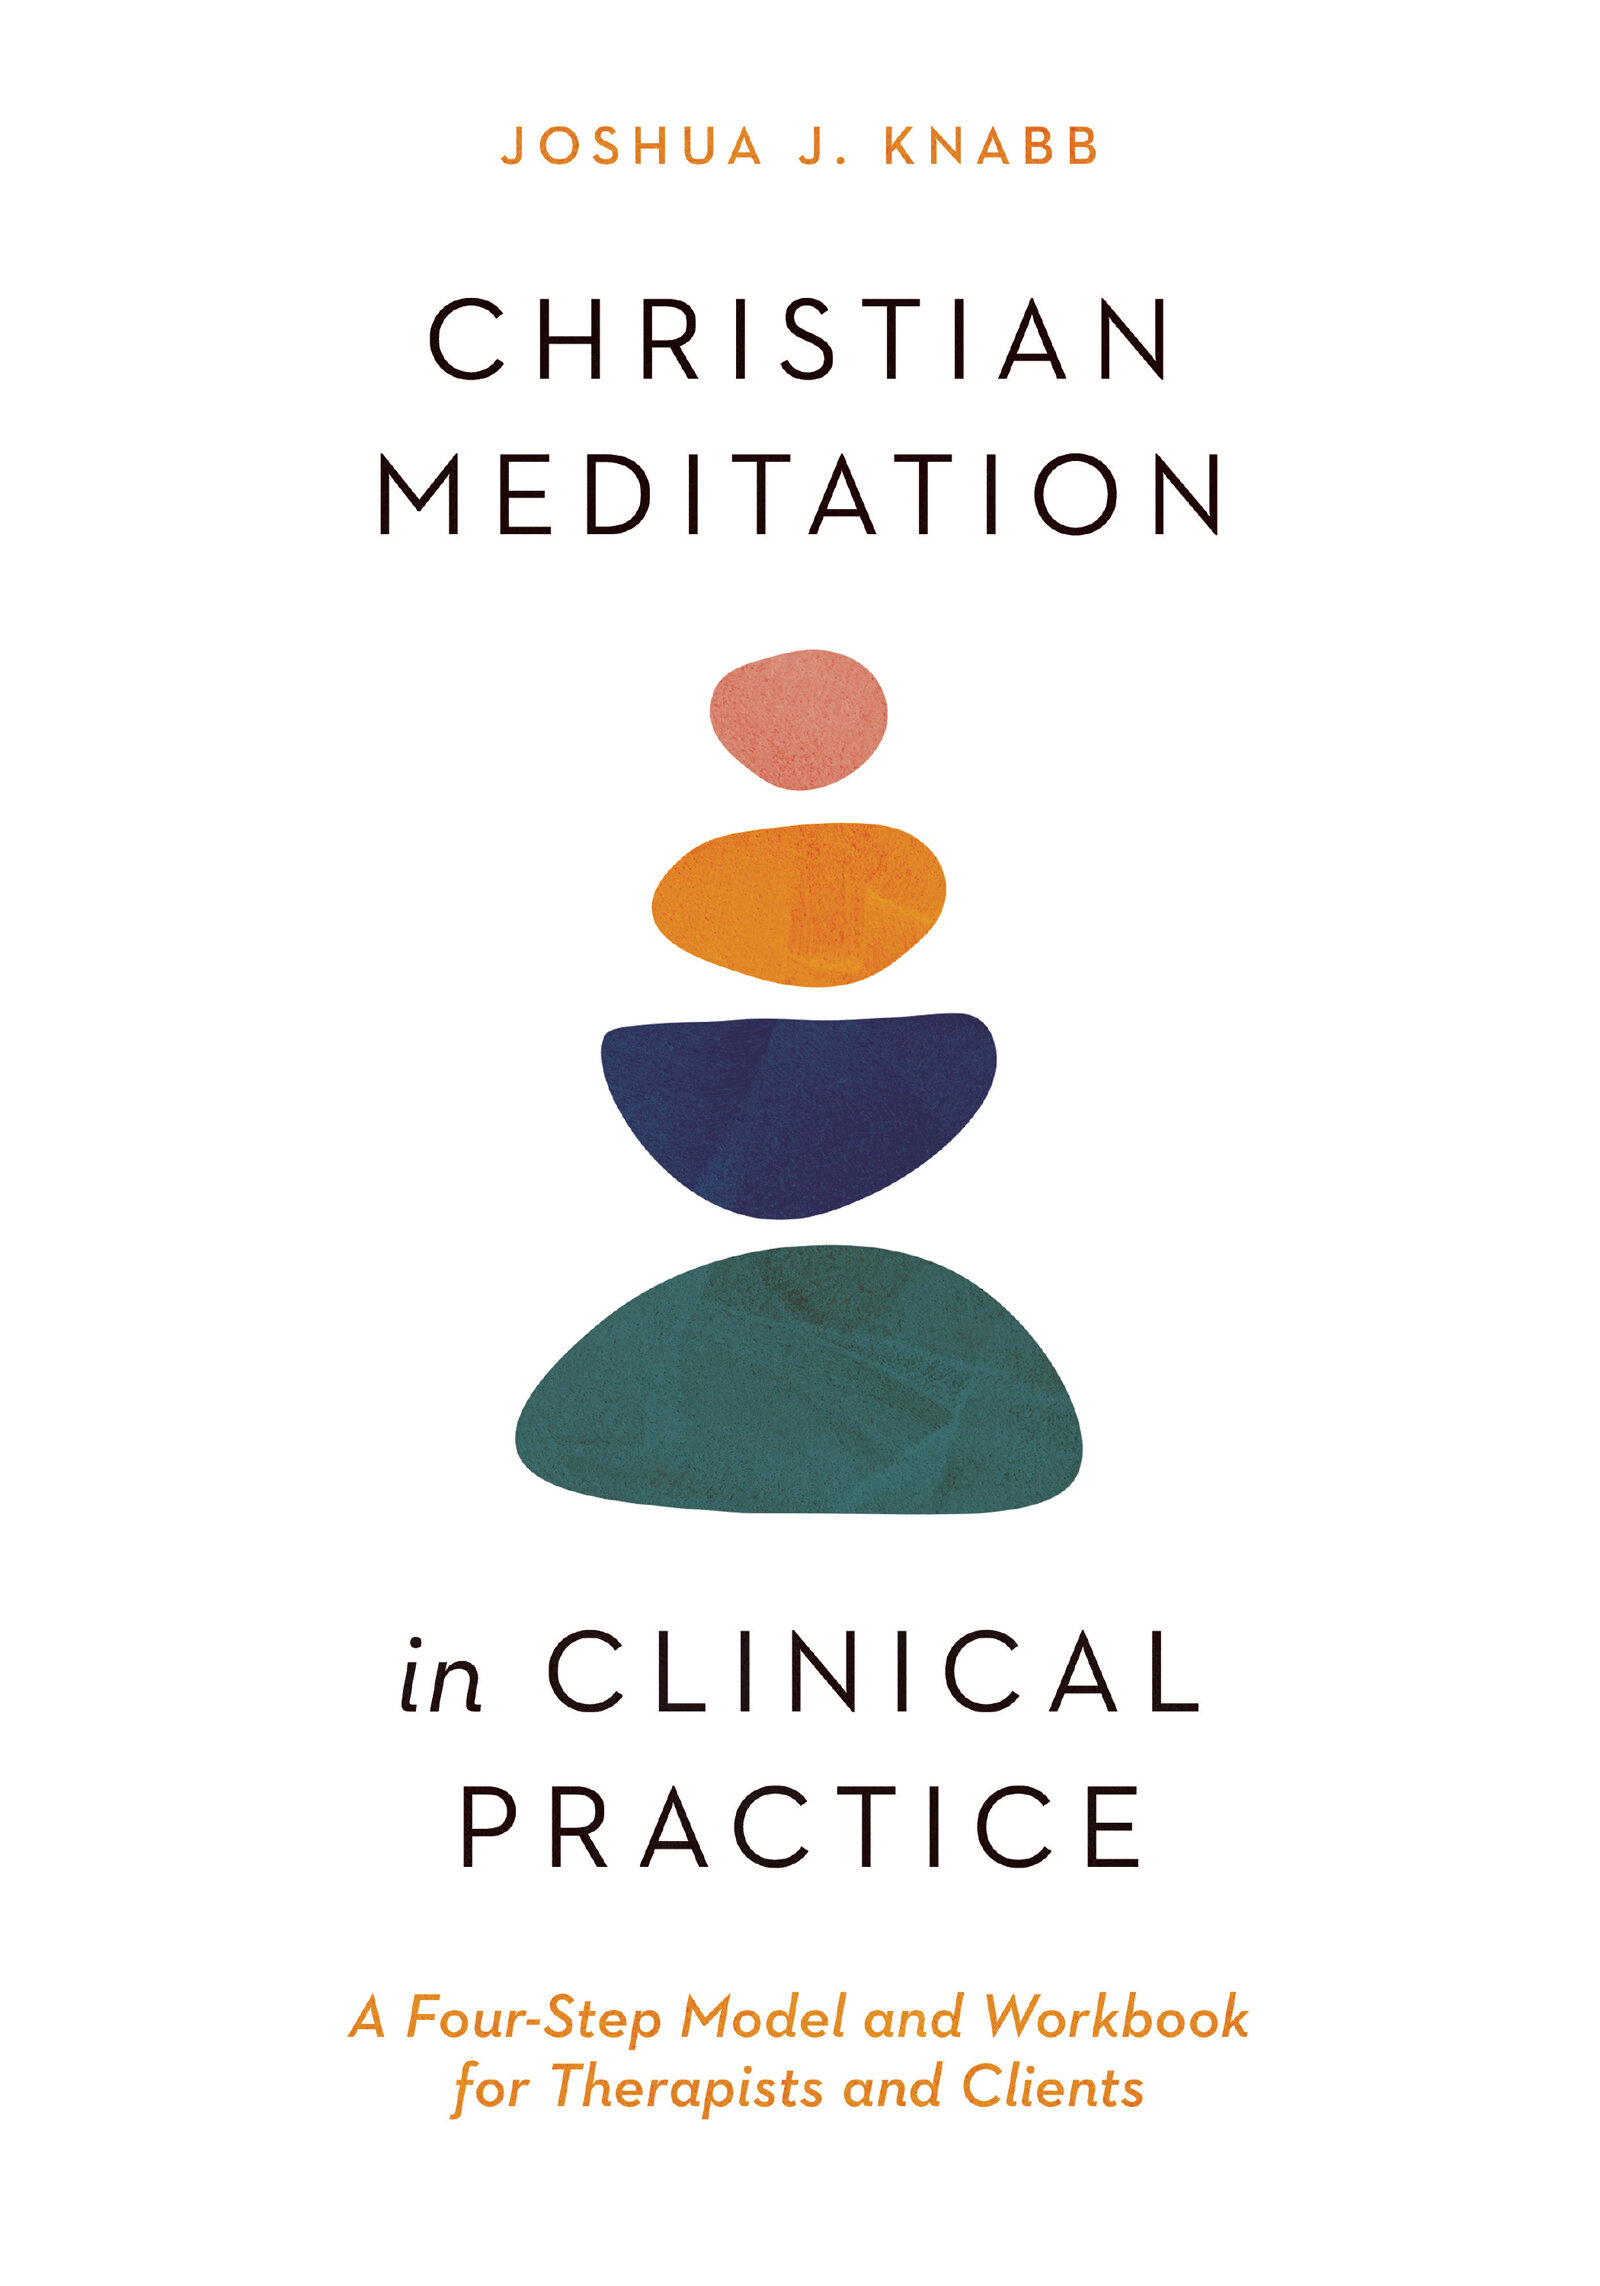 Christian Meditation in Clinical Practice: A Four-Step Model and Workbook for Therapists and Clients (Christian Association for Psychological Studies | CAPS)